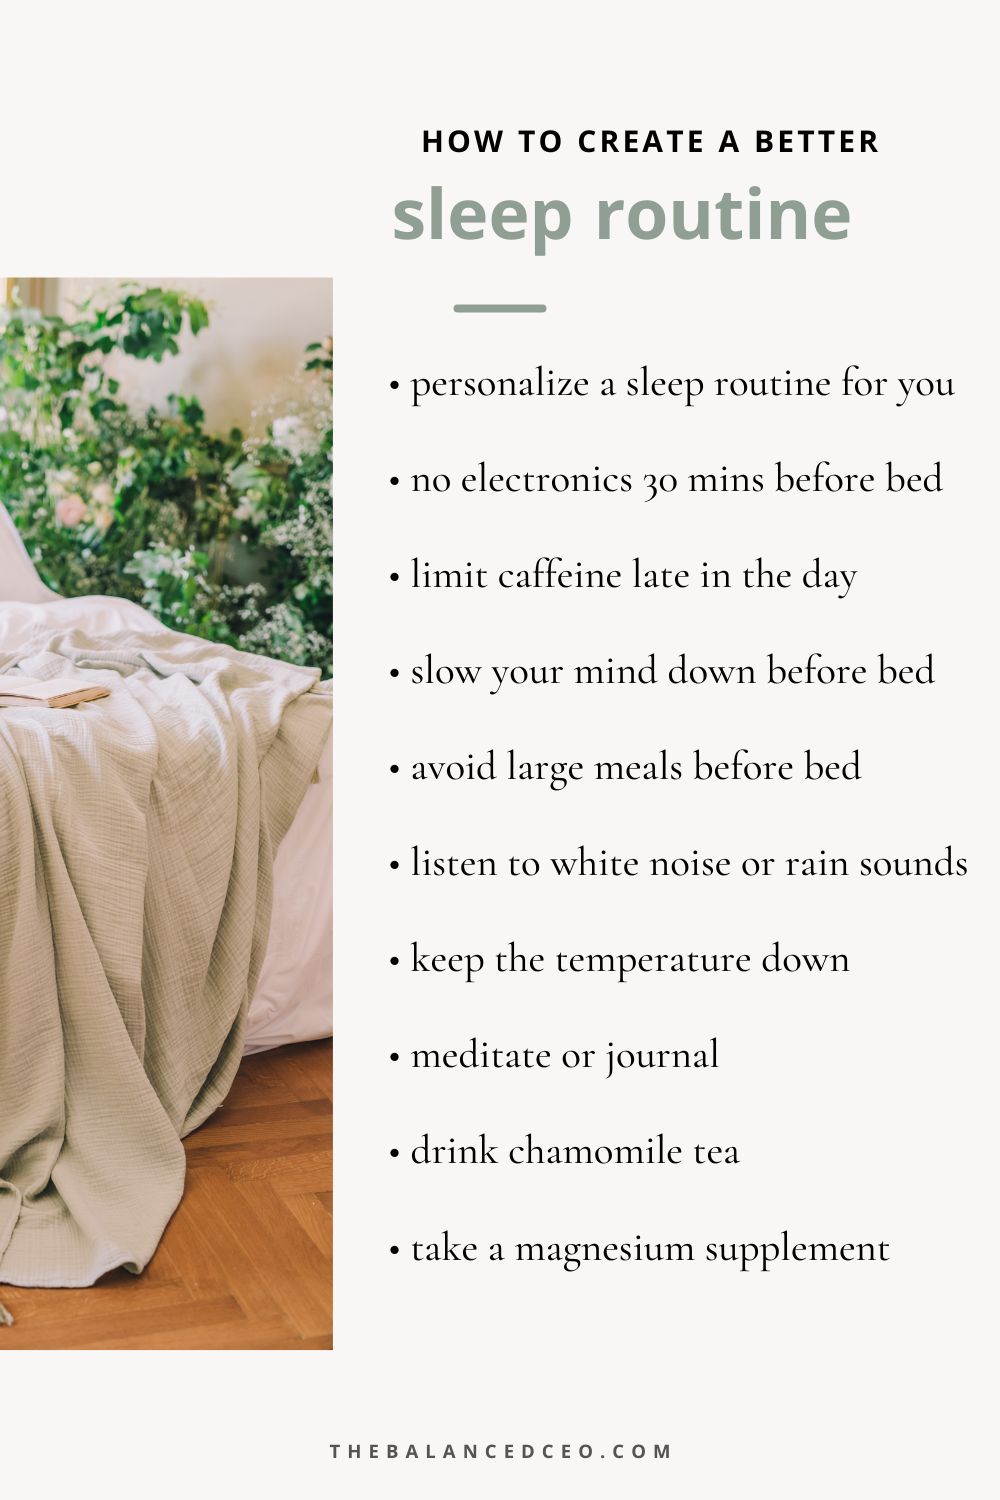 How to Create a Better Sleep Routine